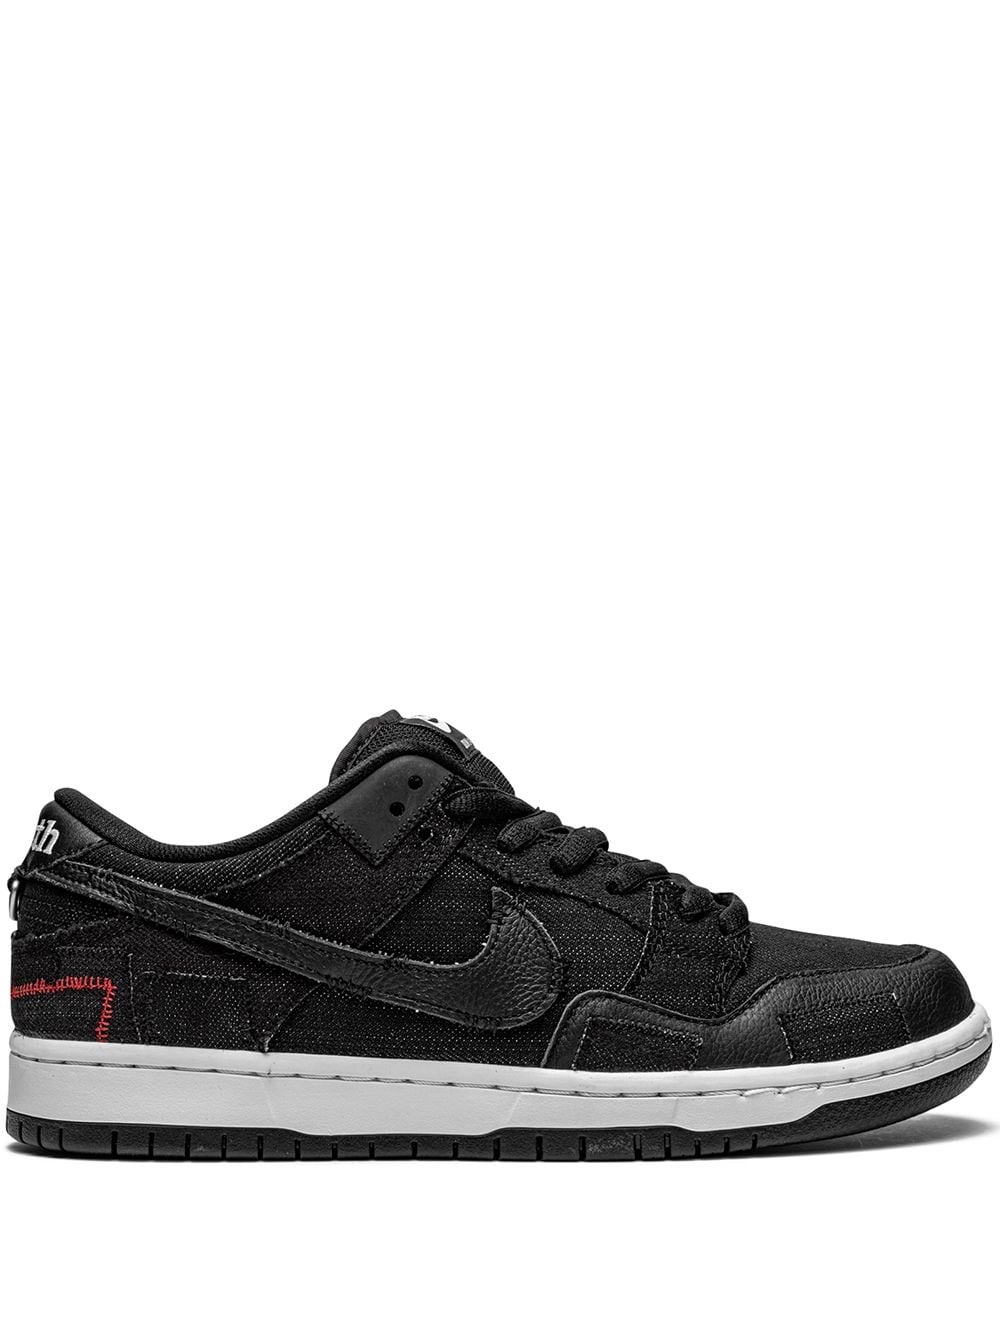 Nike SB Dunk Low "Wasted Youth" sneakers - Black von Nike